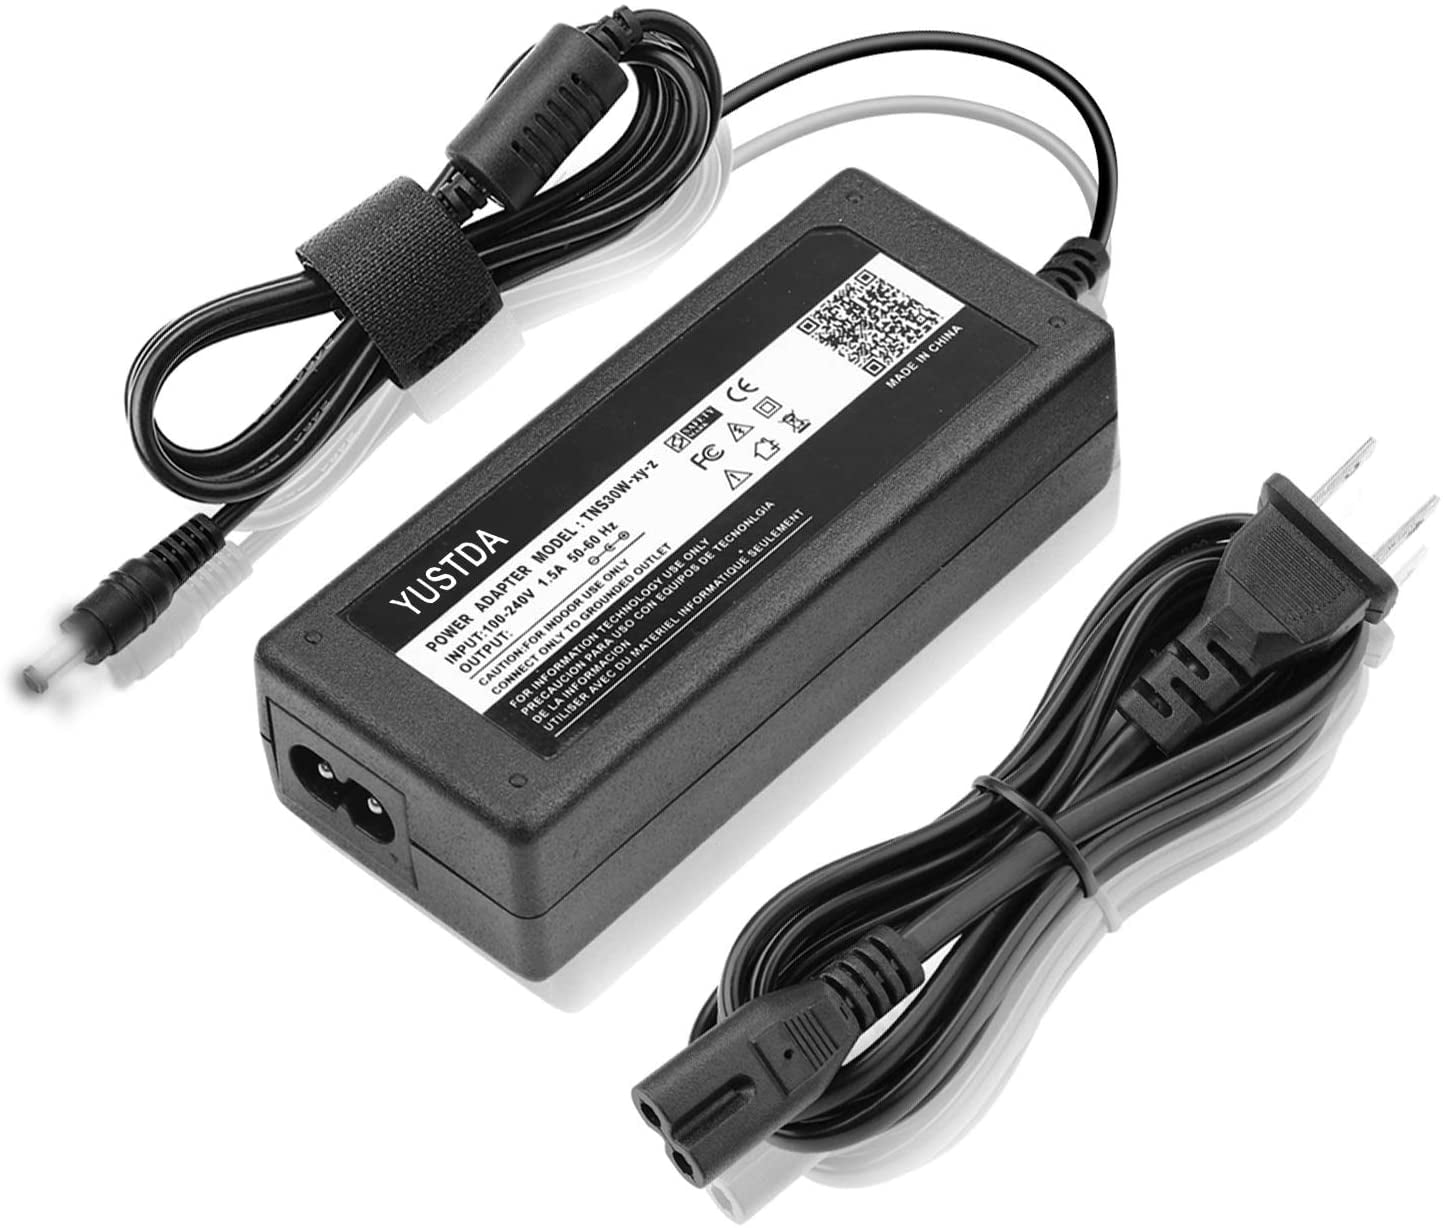 Kircuit AC Adapter Replacement for Provo Craft Cricut 29-0001 Personal Electronic Cutter Power Cord, Black